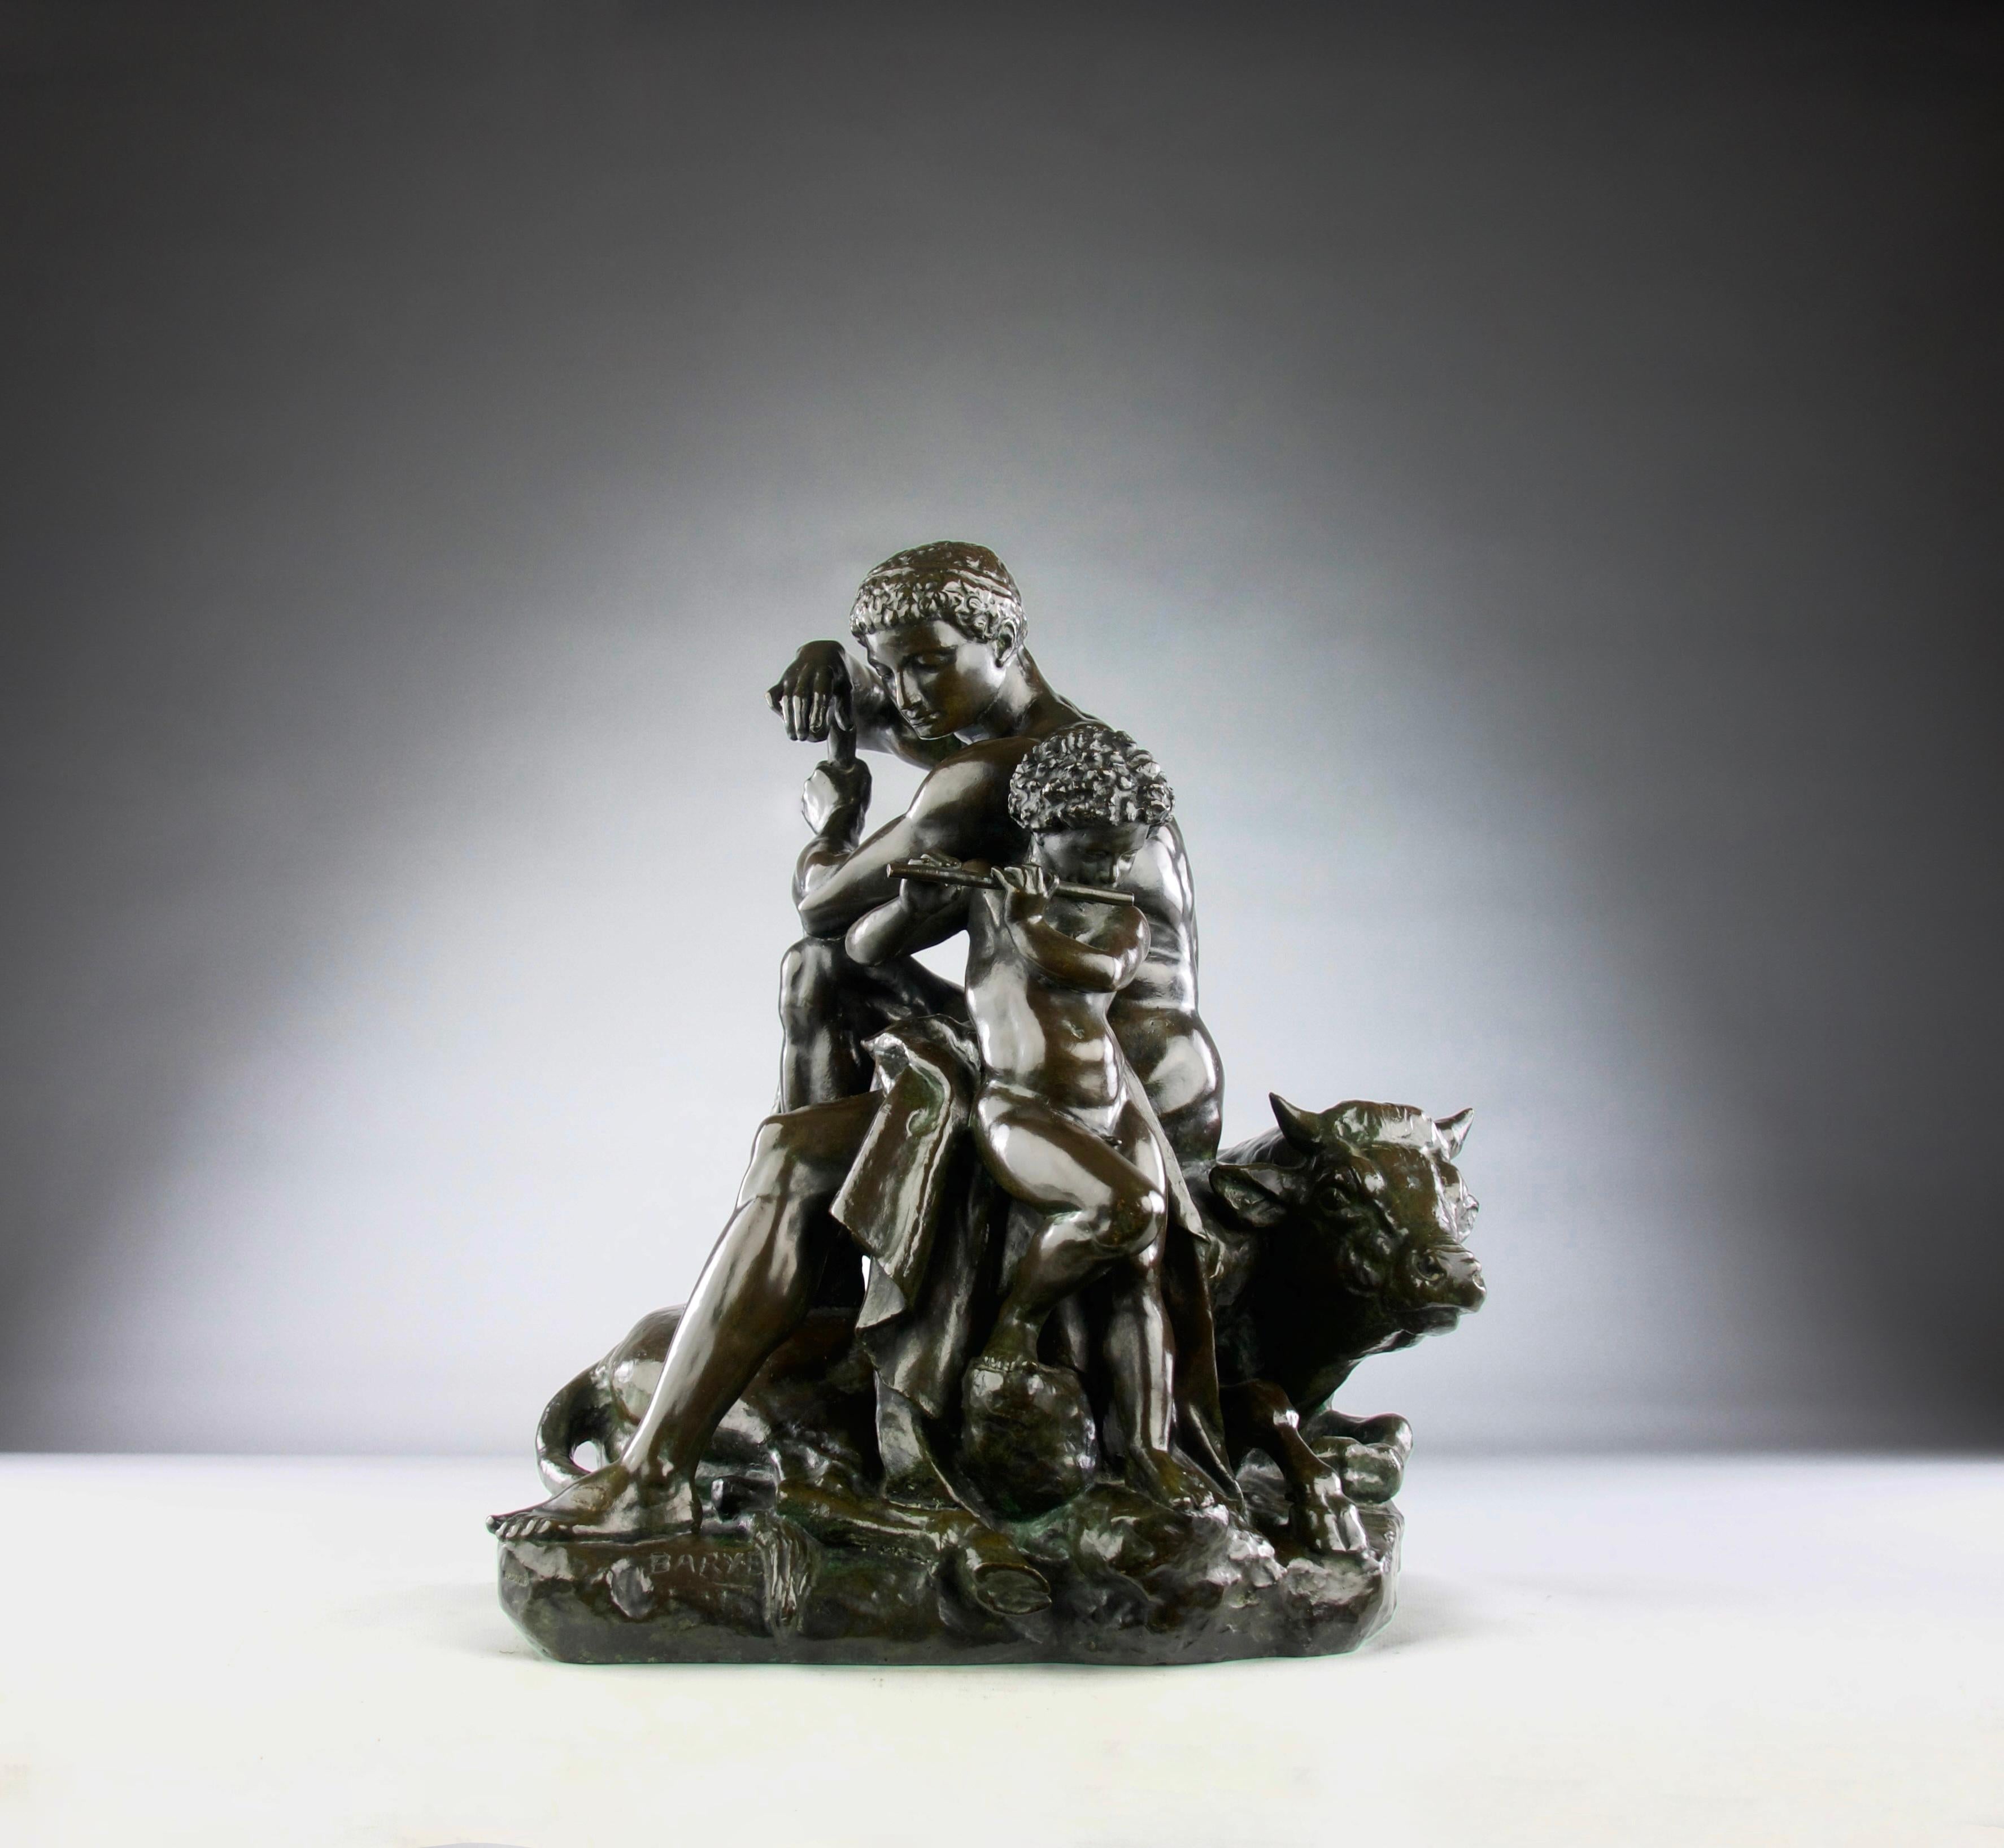 Magnificent and extremely rare Antoine-Louis Barye sculptural bronze titled 